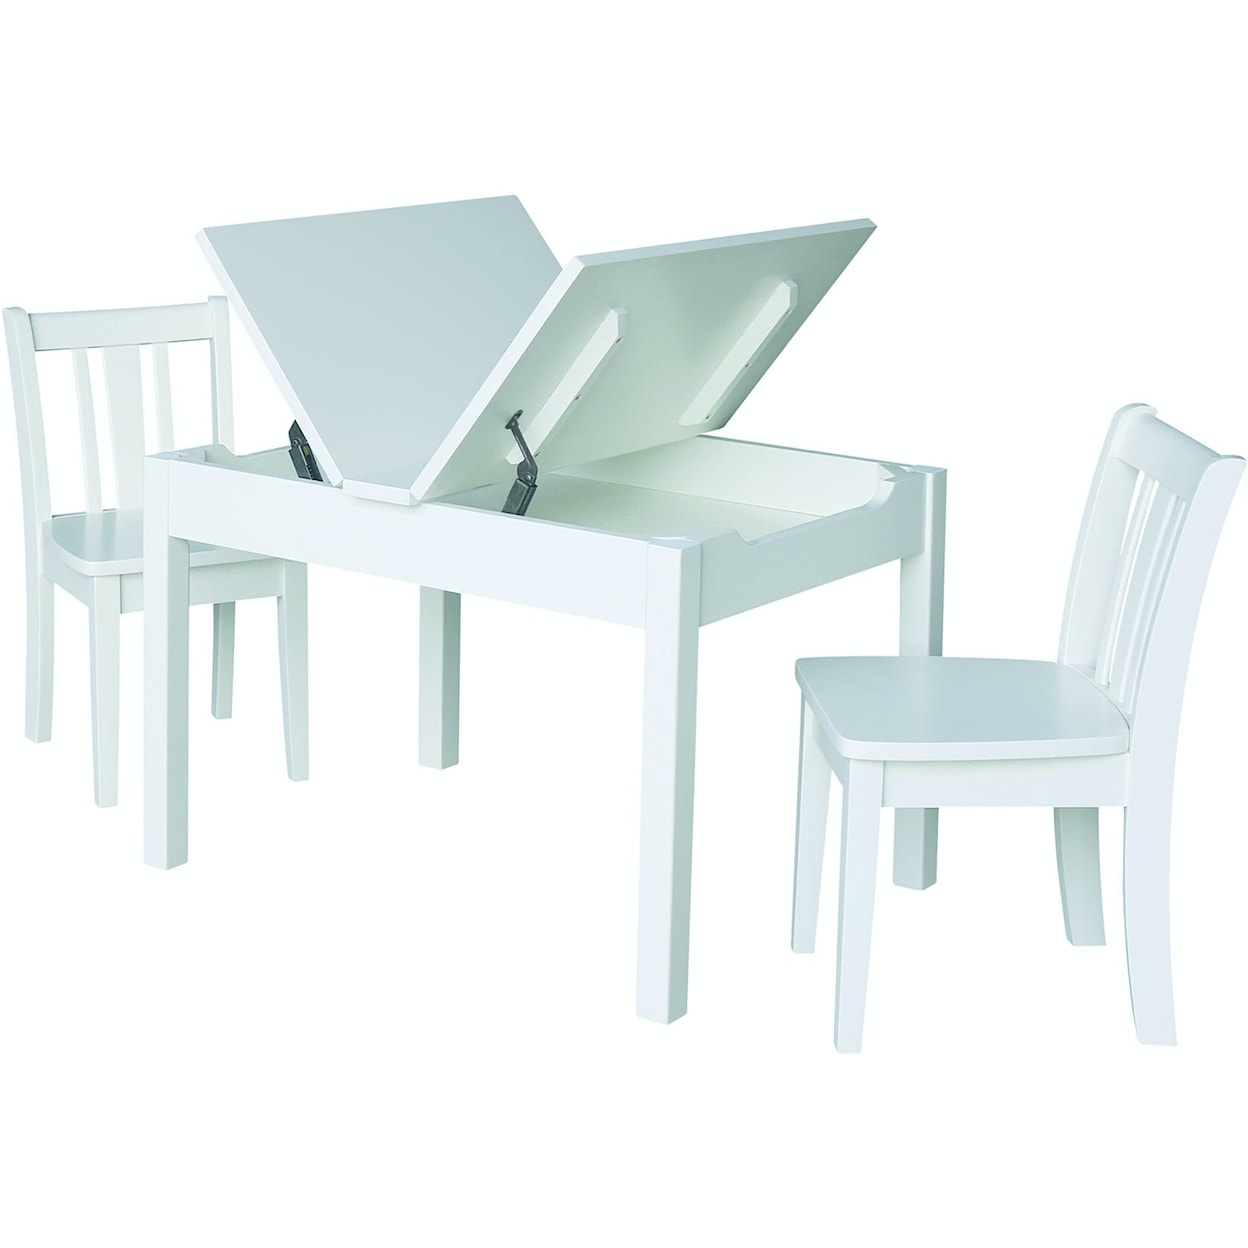 Carolina Dinette Home Accents Storage Table and Chairs in White